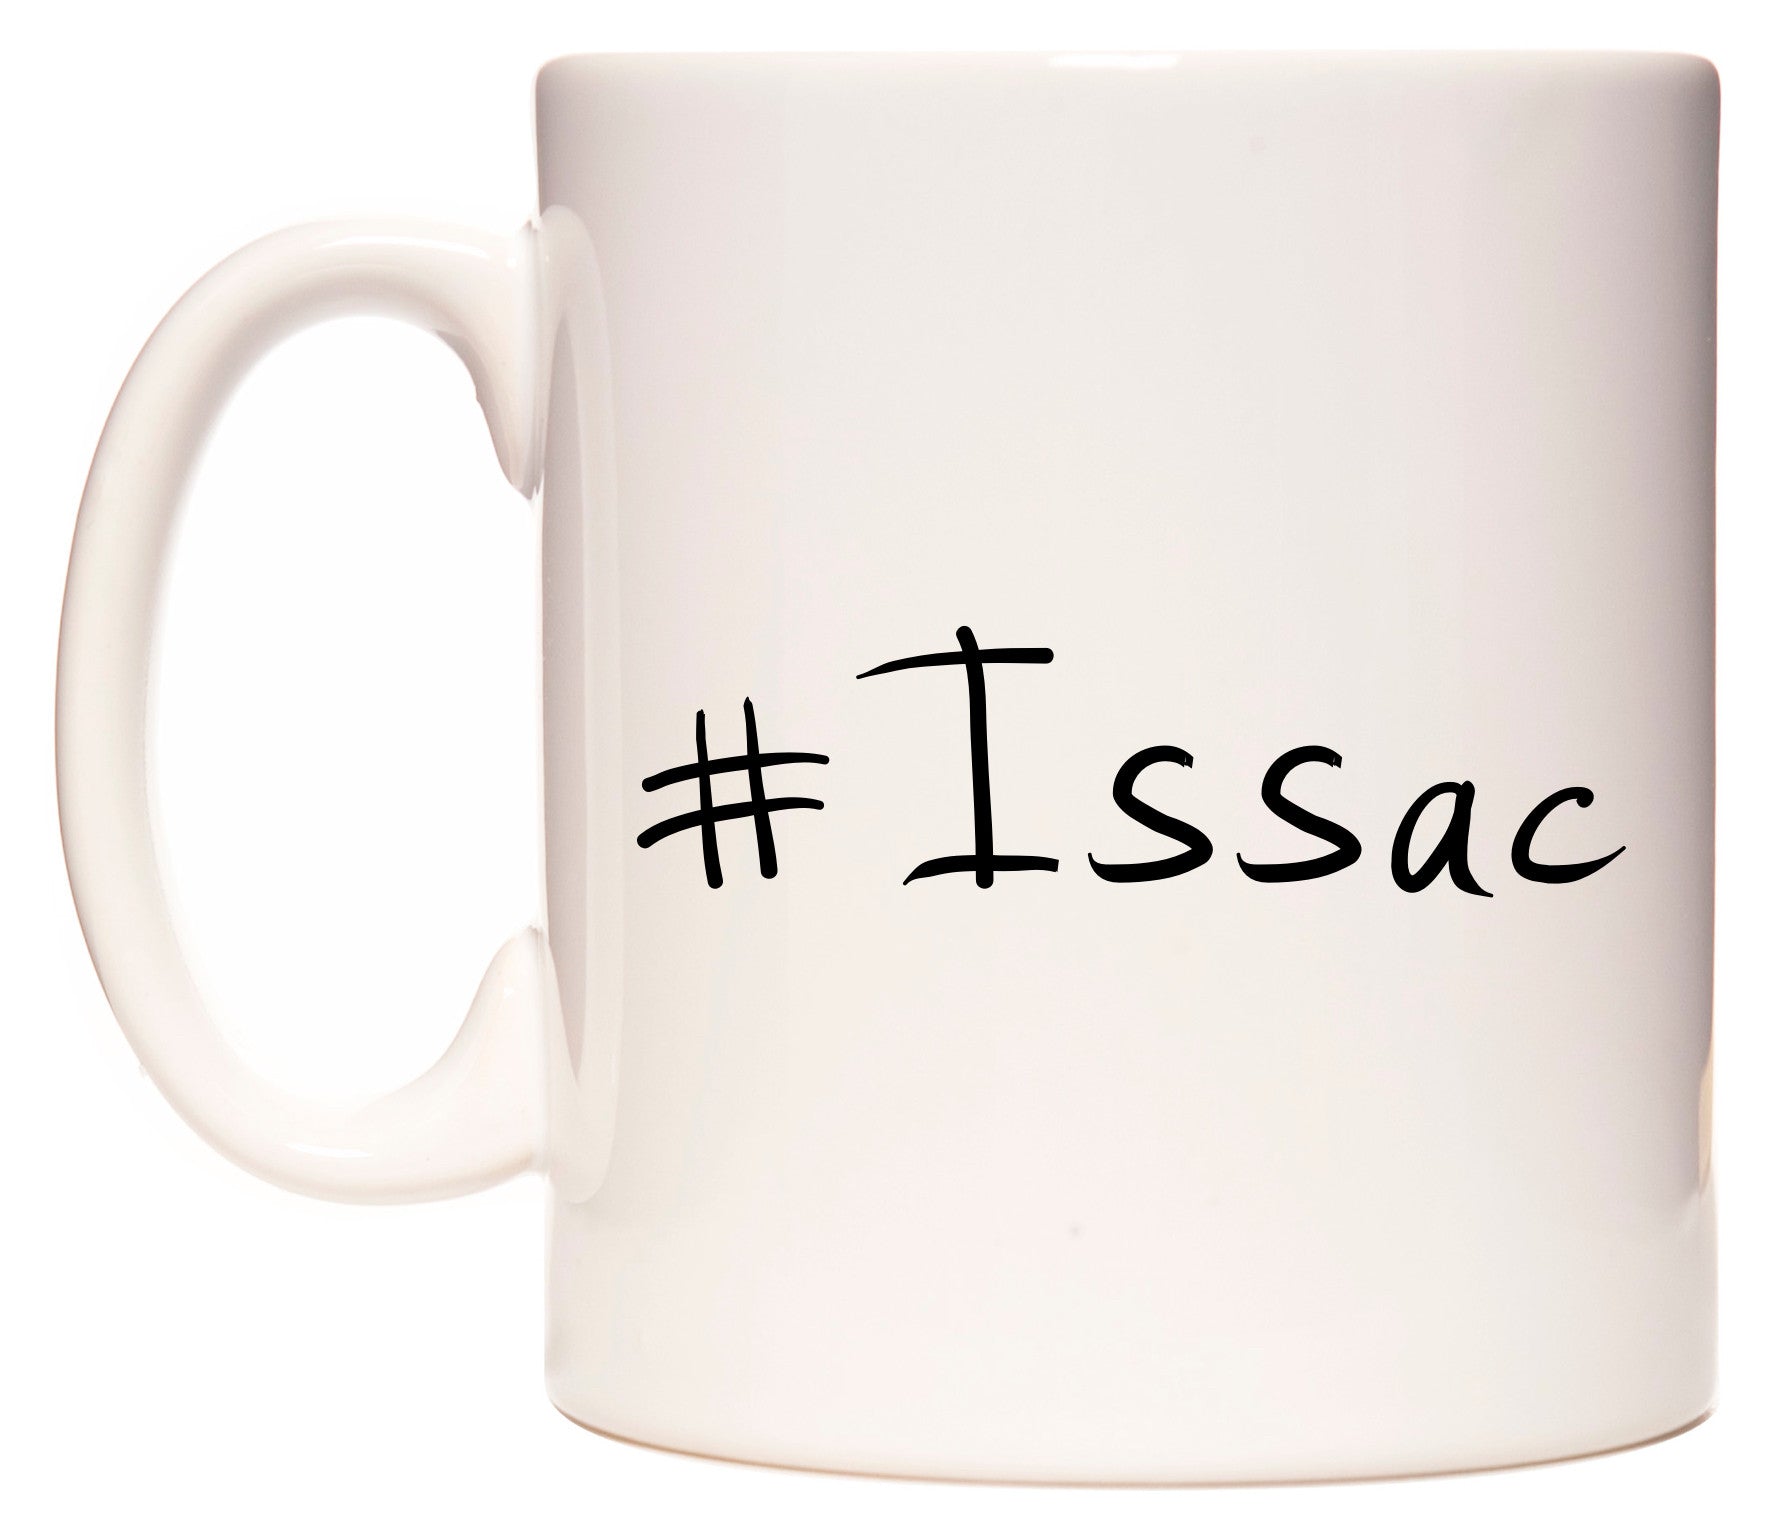 This mug features #Issac